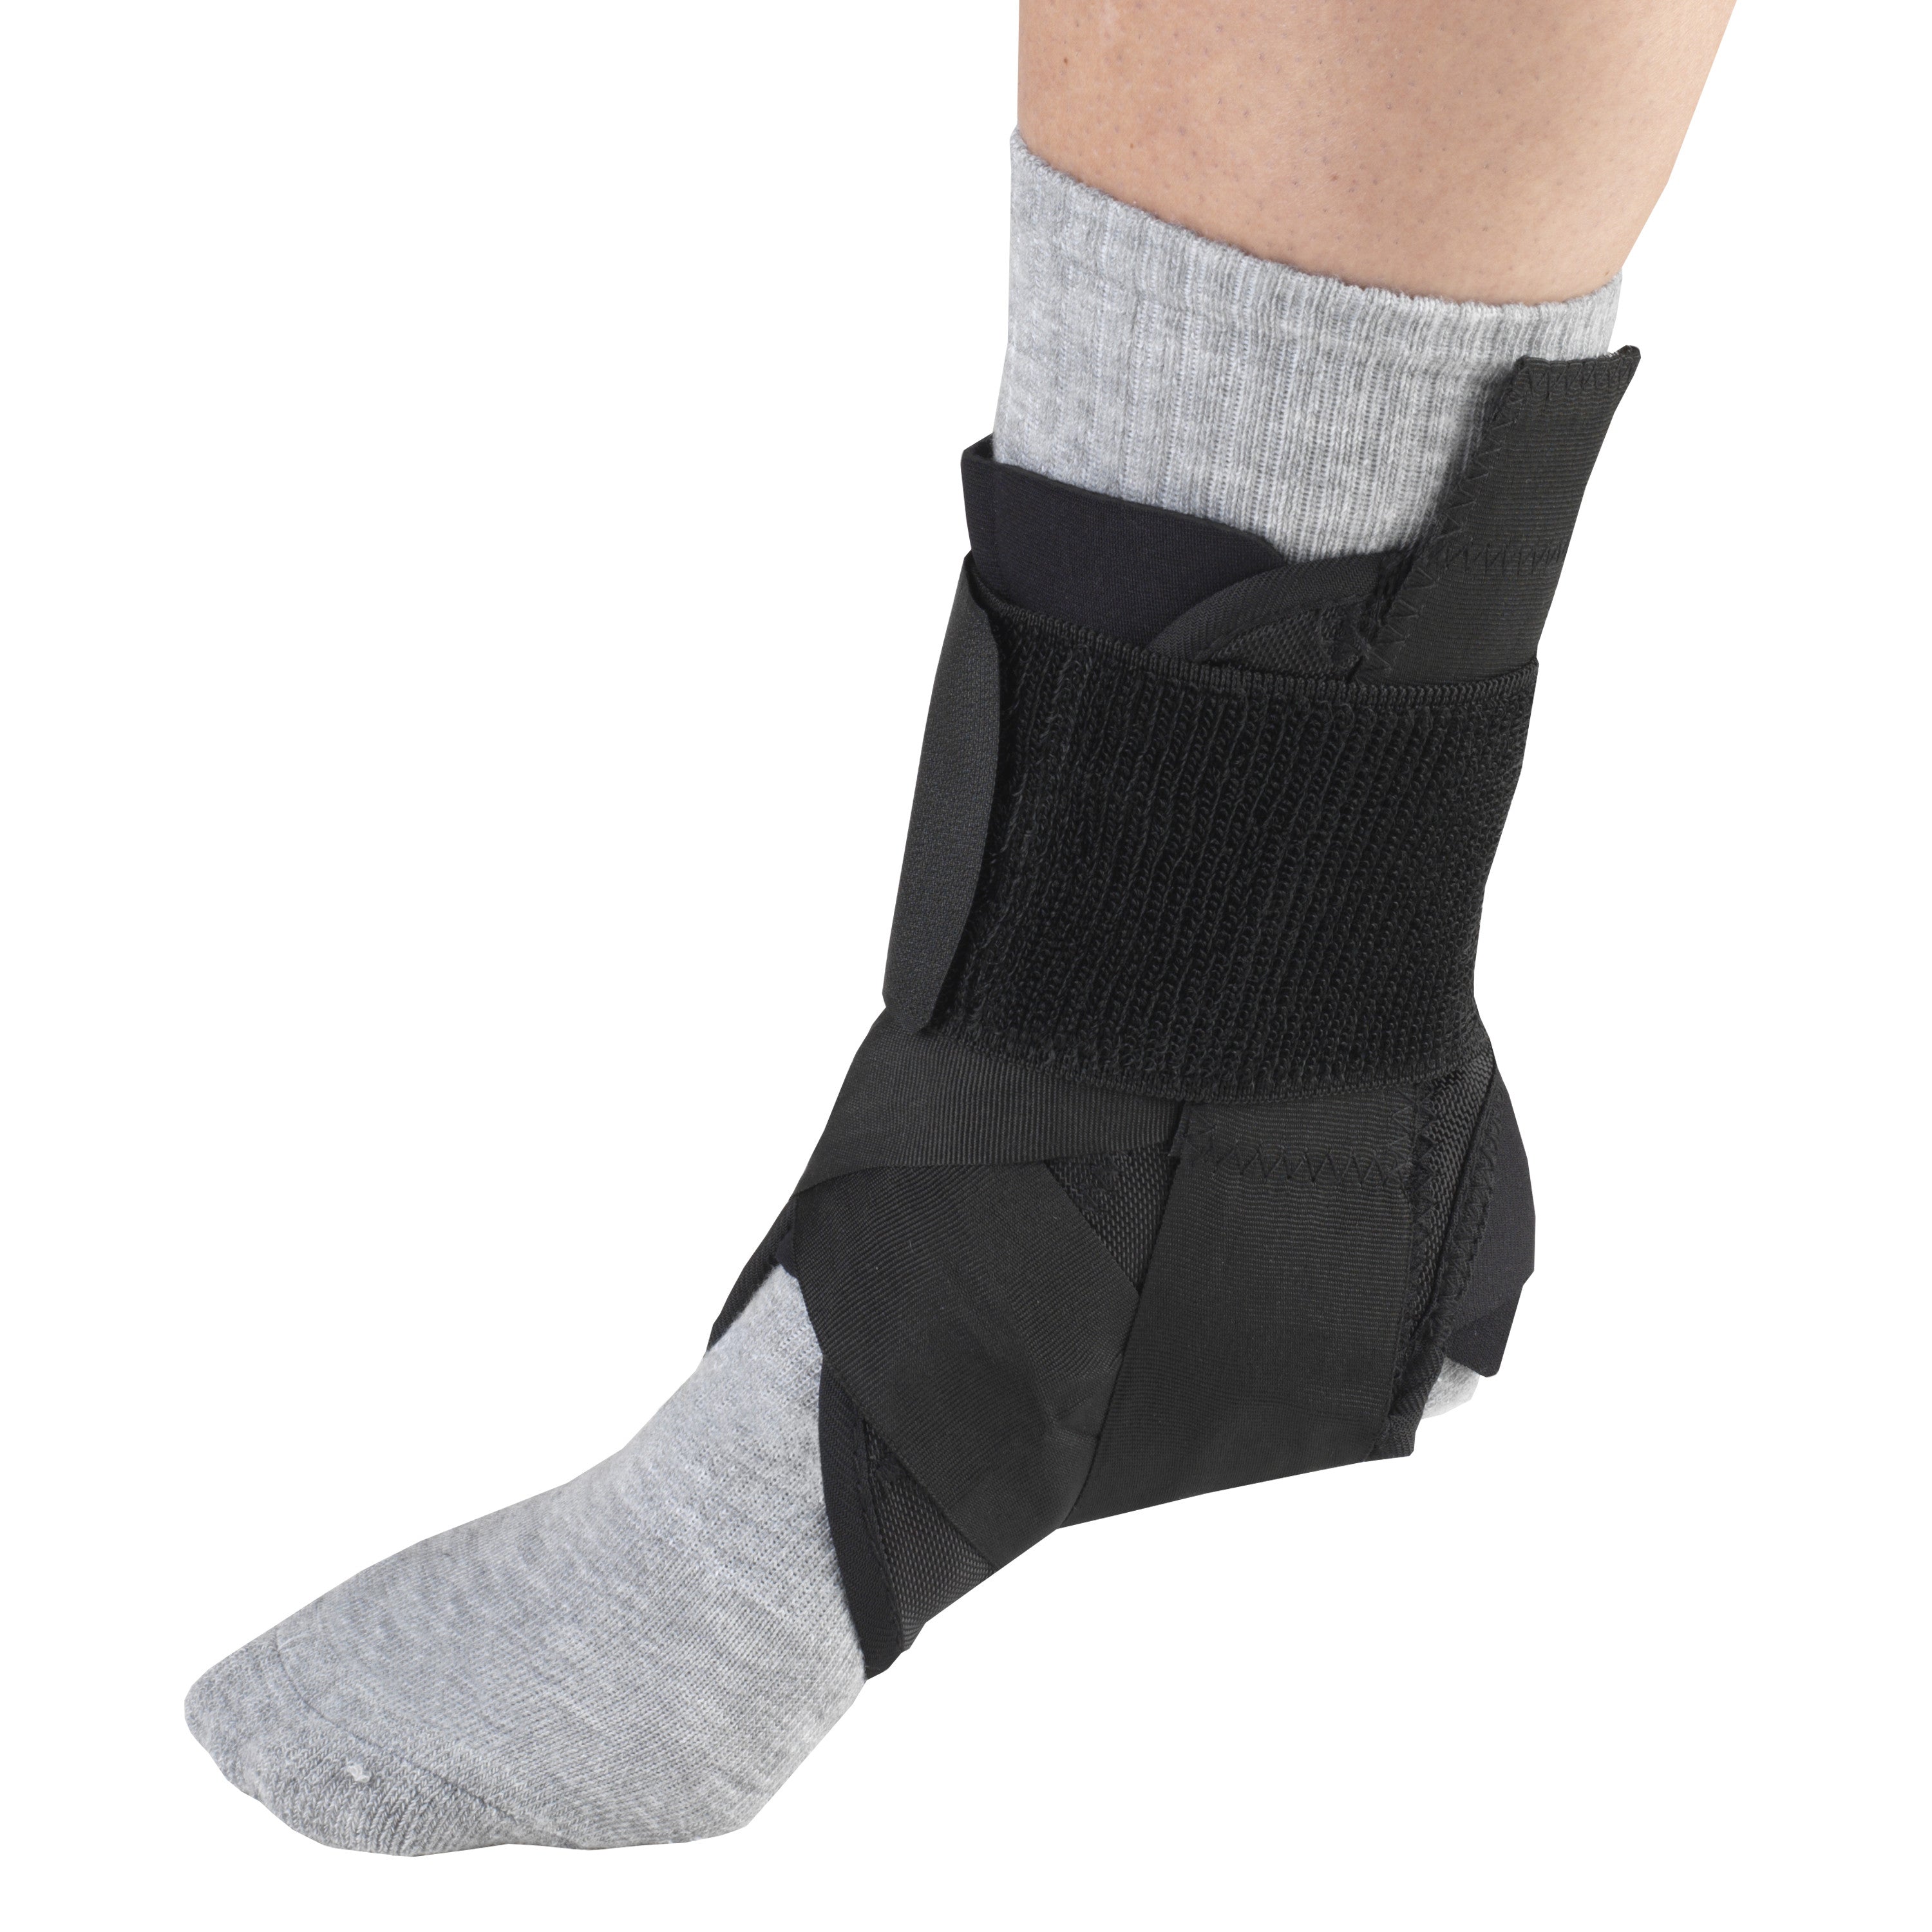 Leeonz Ankle Support Braces, Pain Relief Feet Wrap, Foot Elastic Bandage,  L-Pair Ankle Support - Buy Leeonz Ankle Support Braces, Pain Relief Feet  Wrap, Foot Elastic Bandage, L-Pair Ankle Support Online at